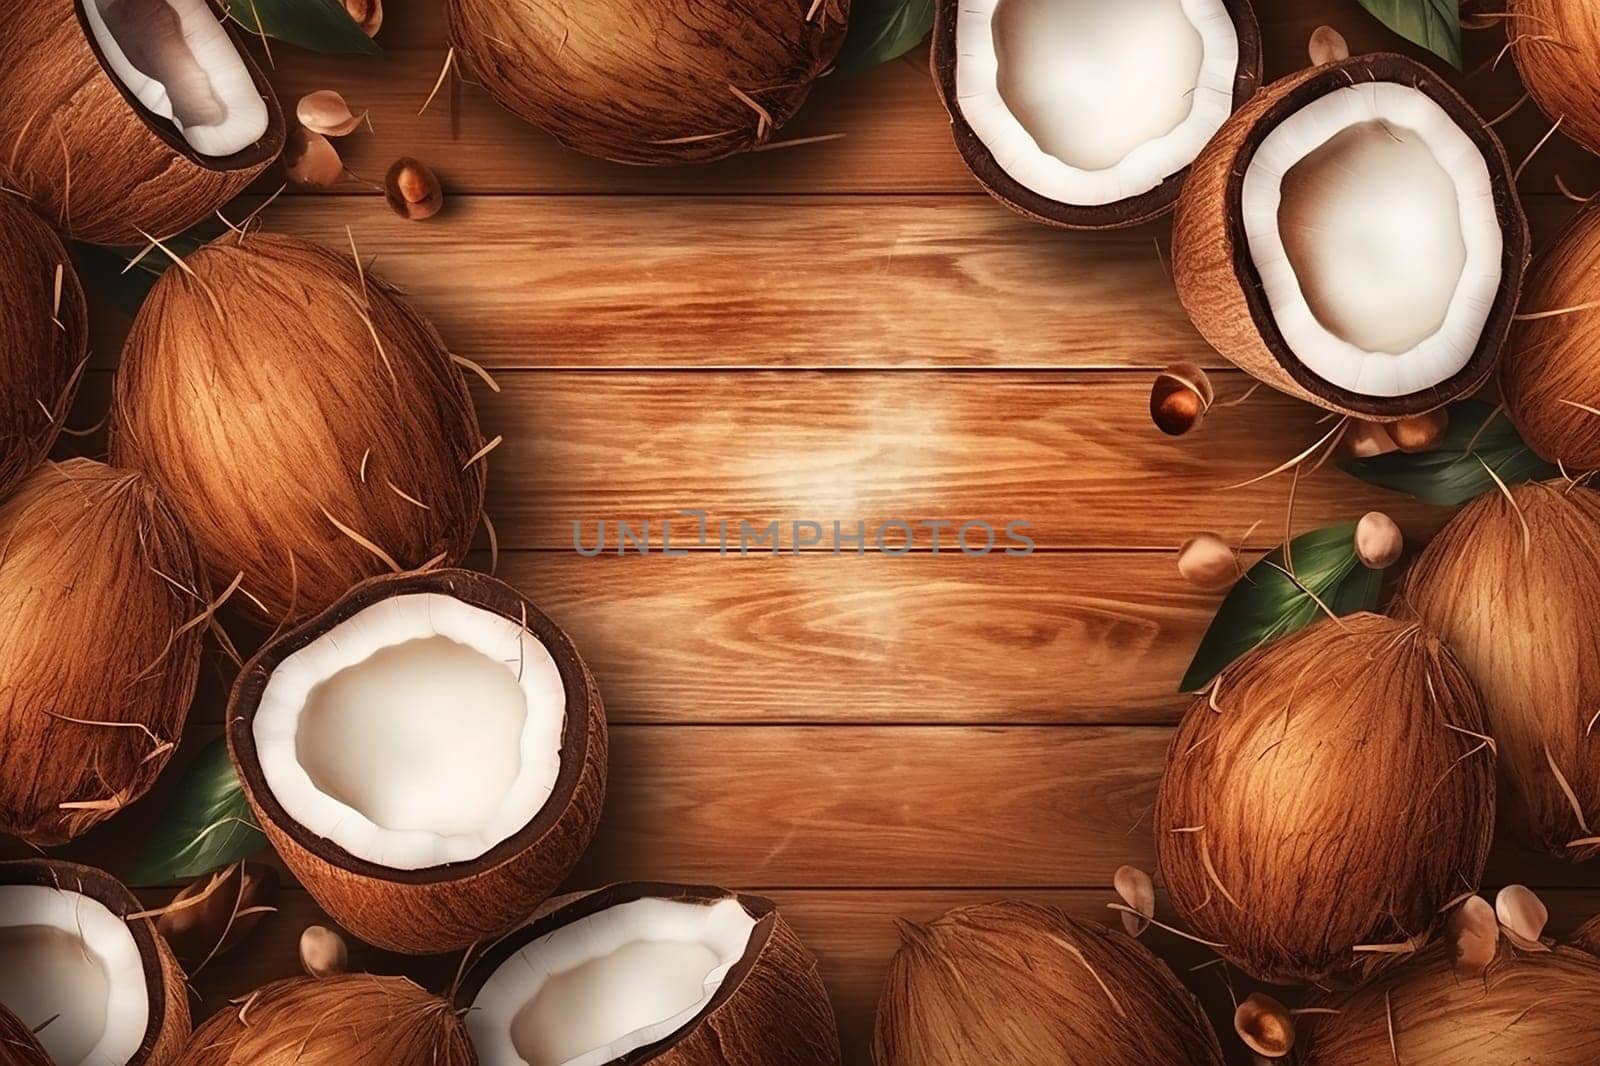 Whole and halved coconuts on a wooden surface. by Hype2art